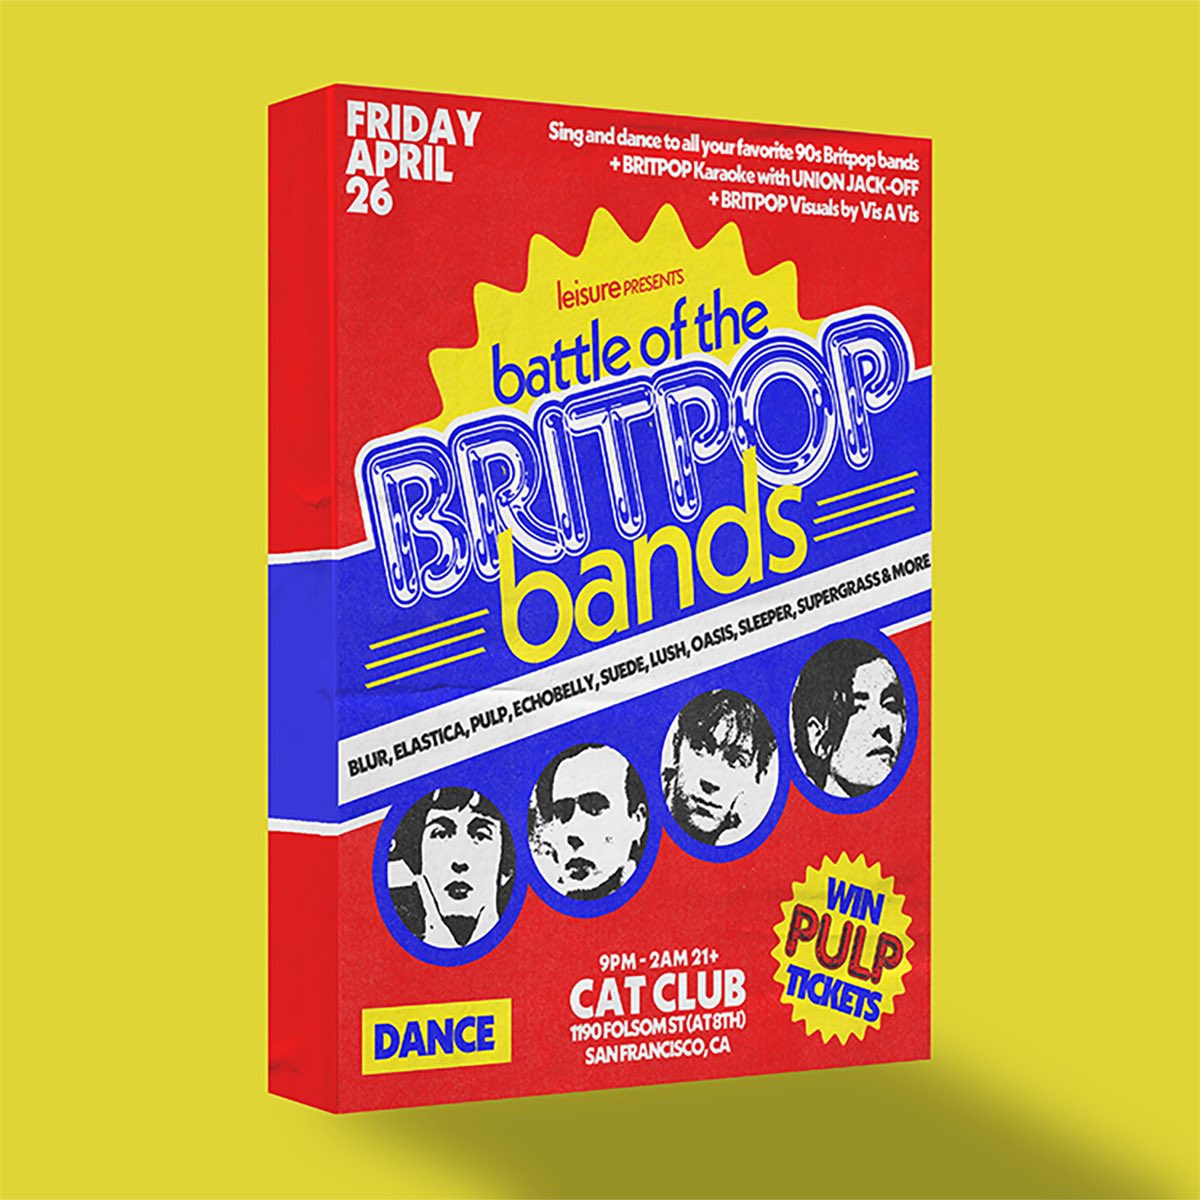 A WEEK TONIGHT, FRI, APR 26 @LEISURESF BATTLE OF THE BRITPOP BANDS Sing + dance to all the faves: Blur/Elastica/Pulp/Suede/Oasis/Supergrass/Menswear/Marion/Sleeper/Shed Seven/etc Britpop karaoke in the front room w/@unionjackoff Cat Club | 1190 Folsom (at 8th) 9P-2A | 21+ | $10